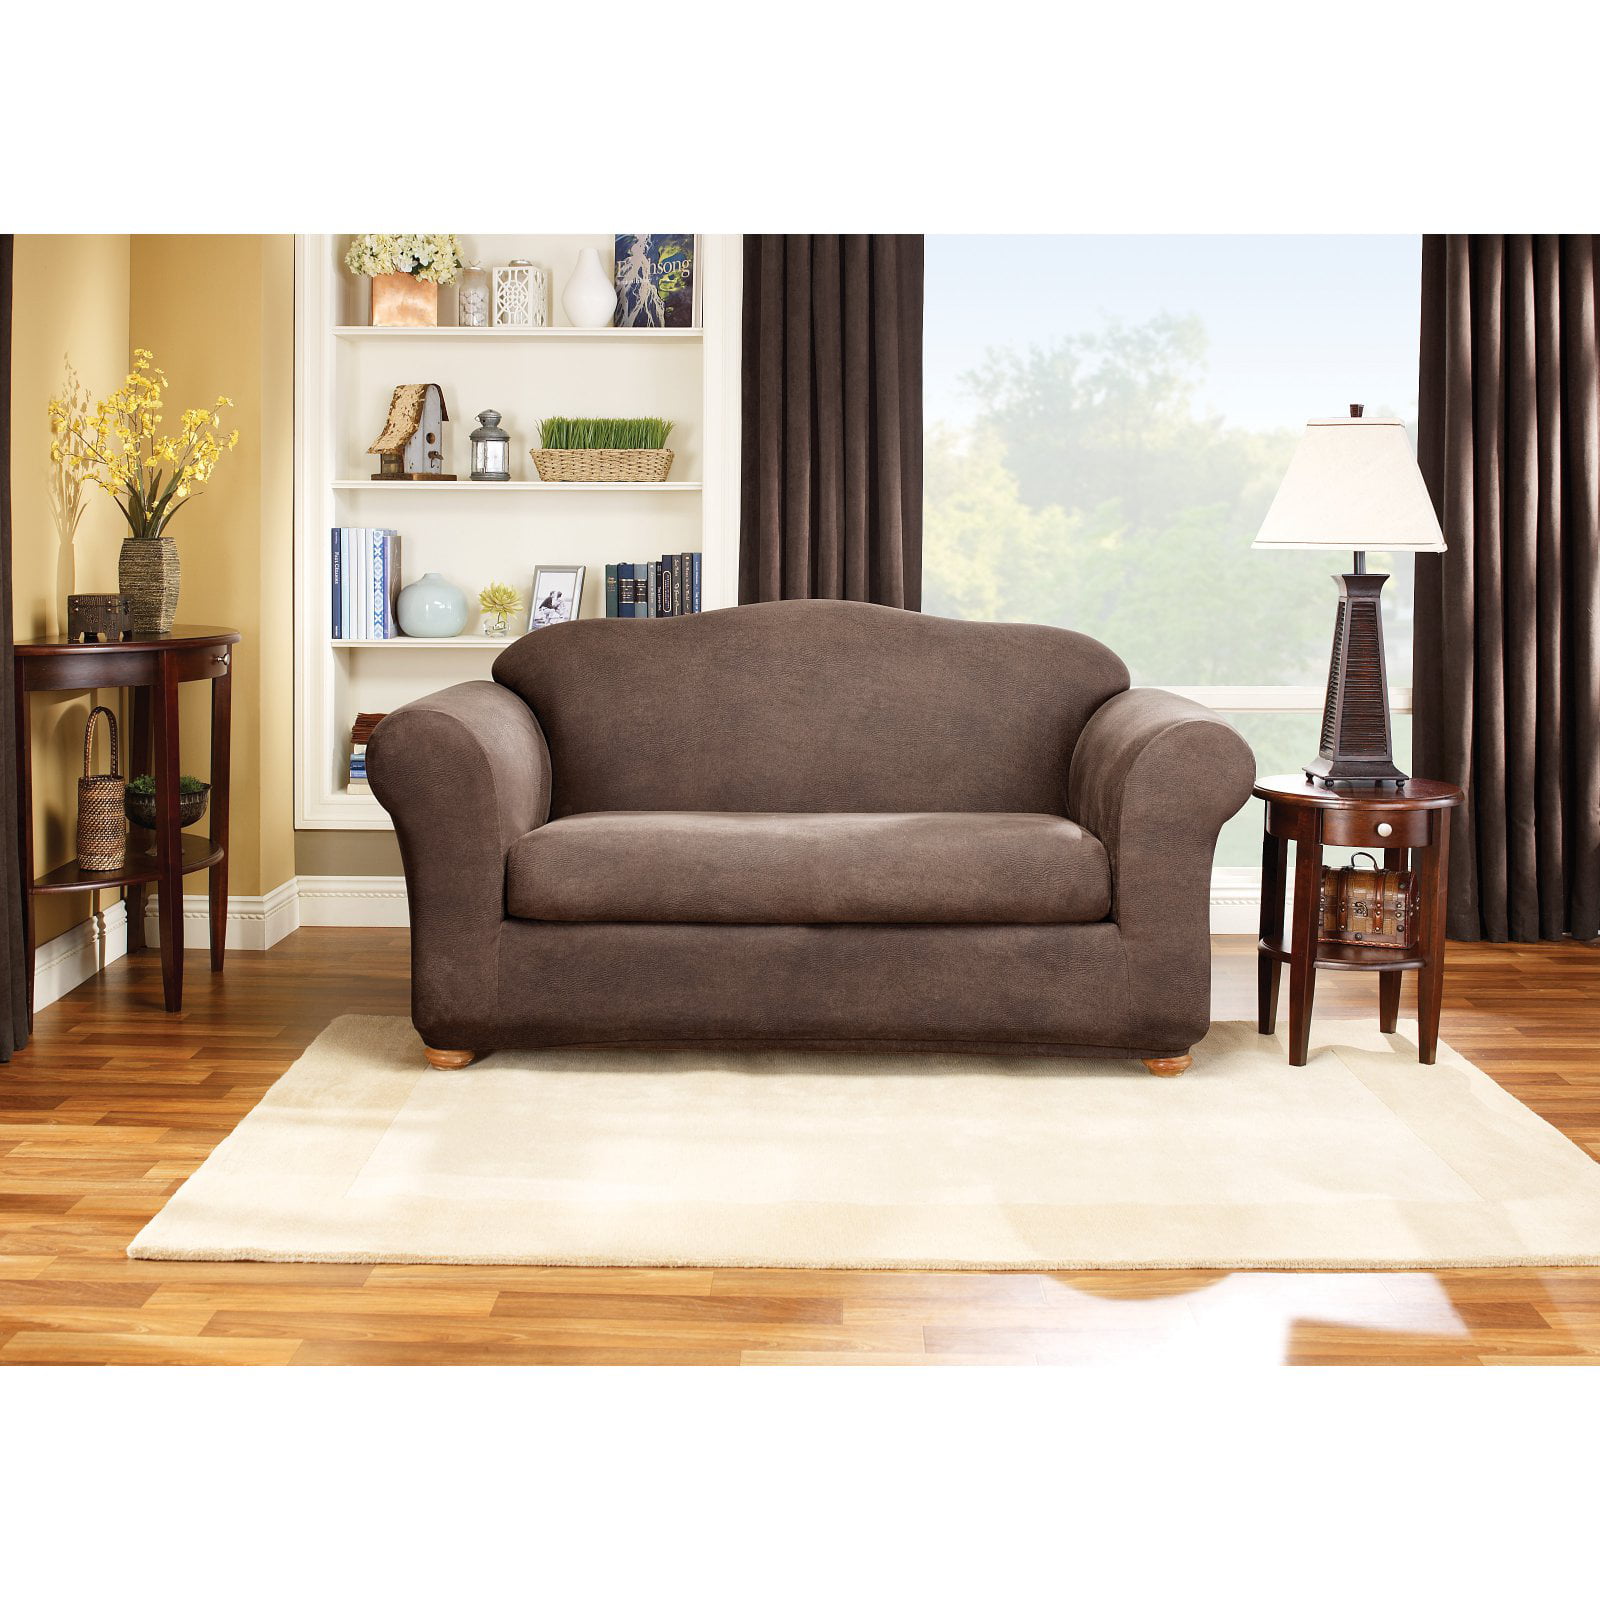 Sure Fit Stretch Leather 2 Piece Sofa, Leather Slipcover For Couch